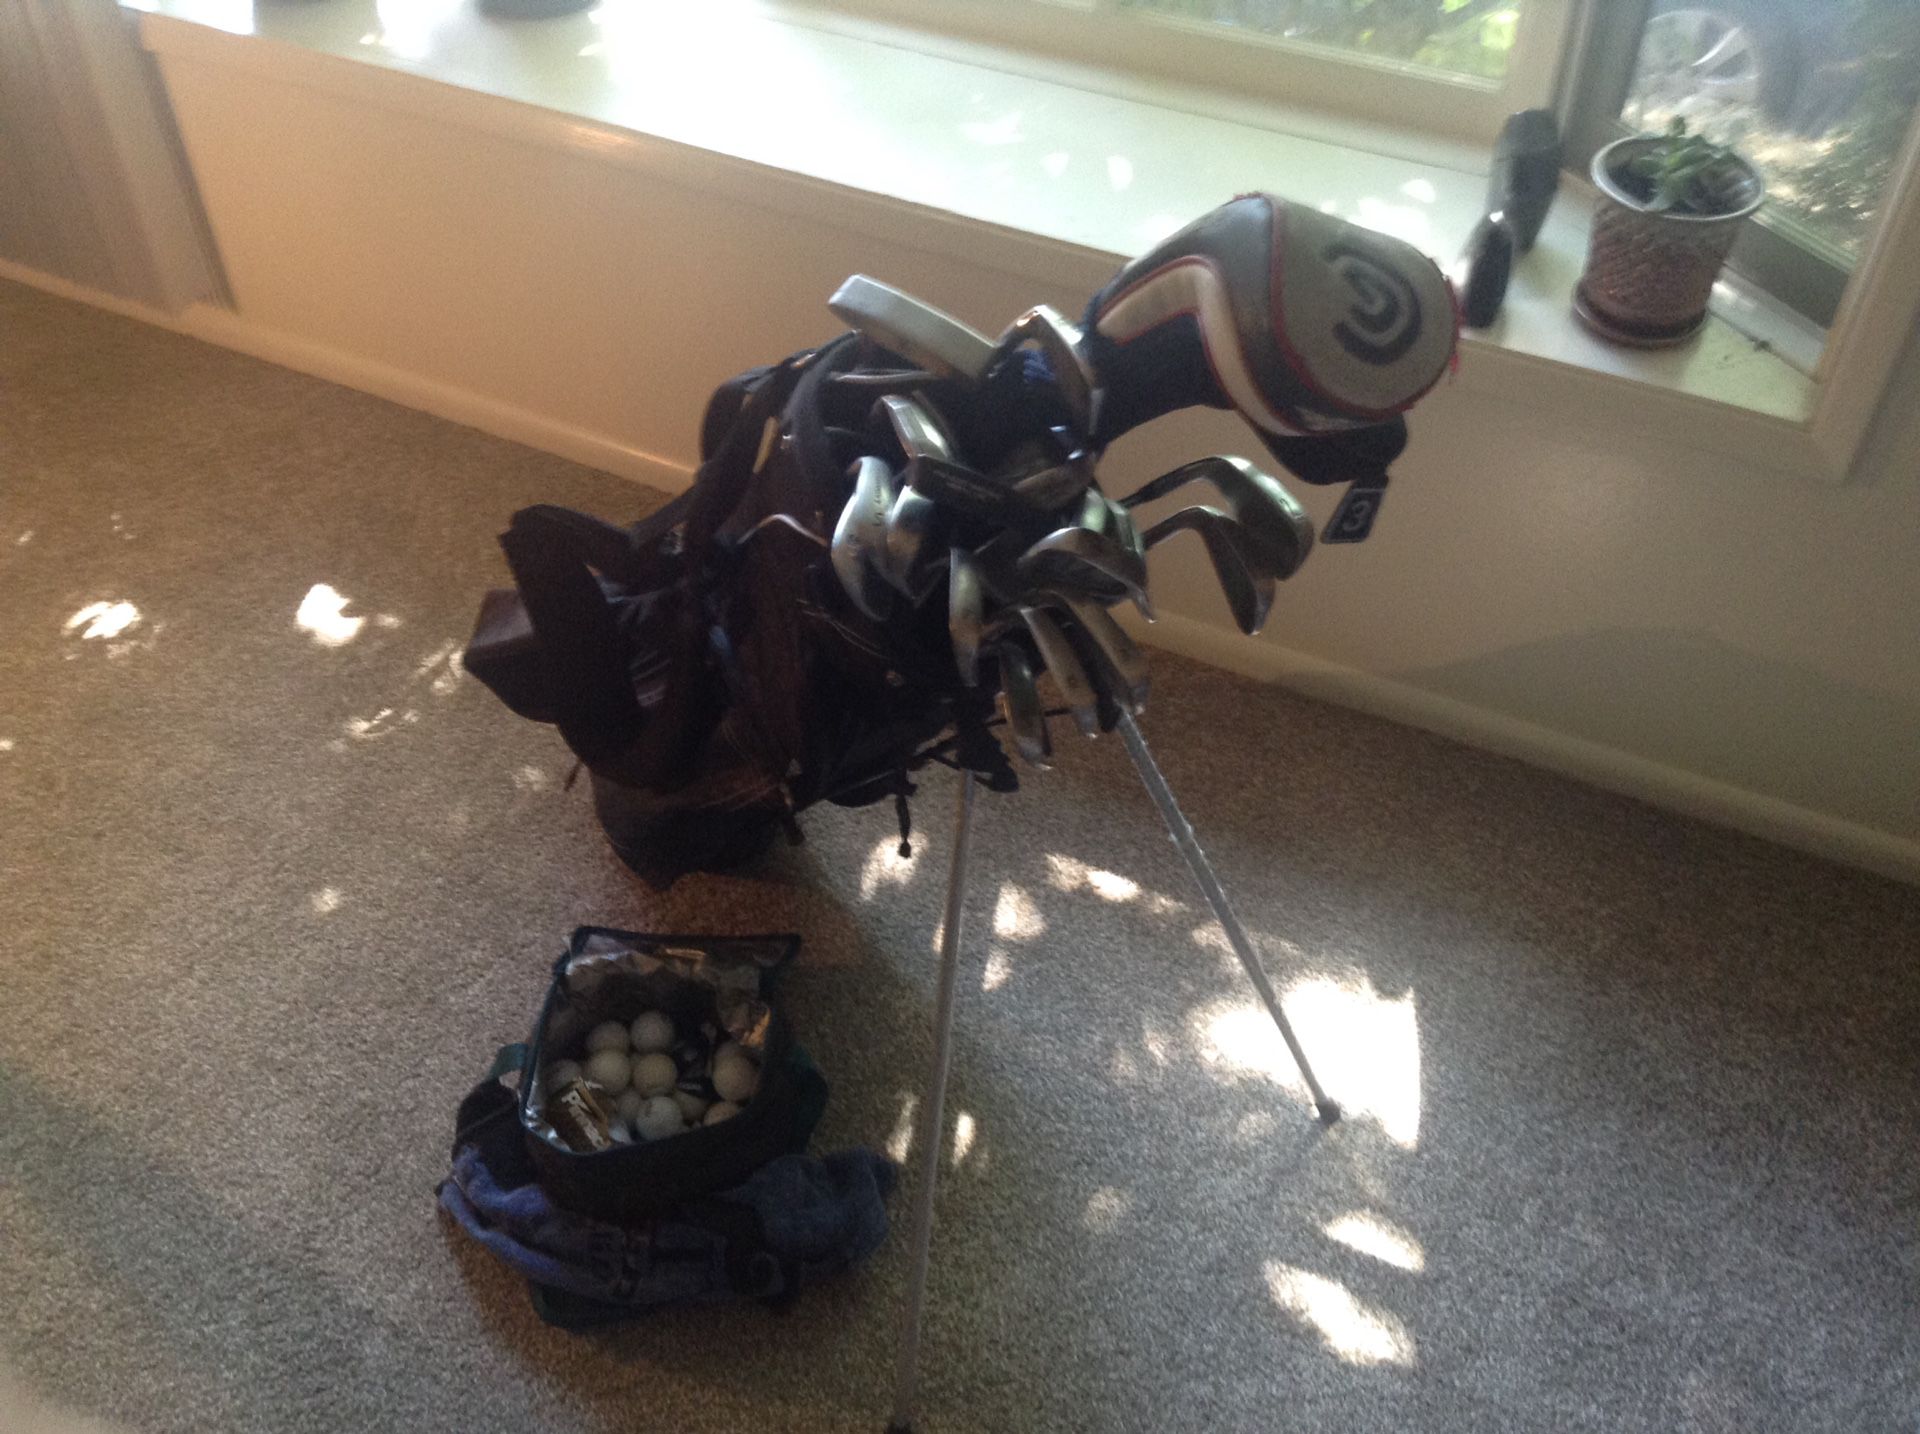 Complete golf set - 2 thru PW, L, S and 3 putters. With extra S and L. Bag has self stand and blackstrap plus several balls.